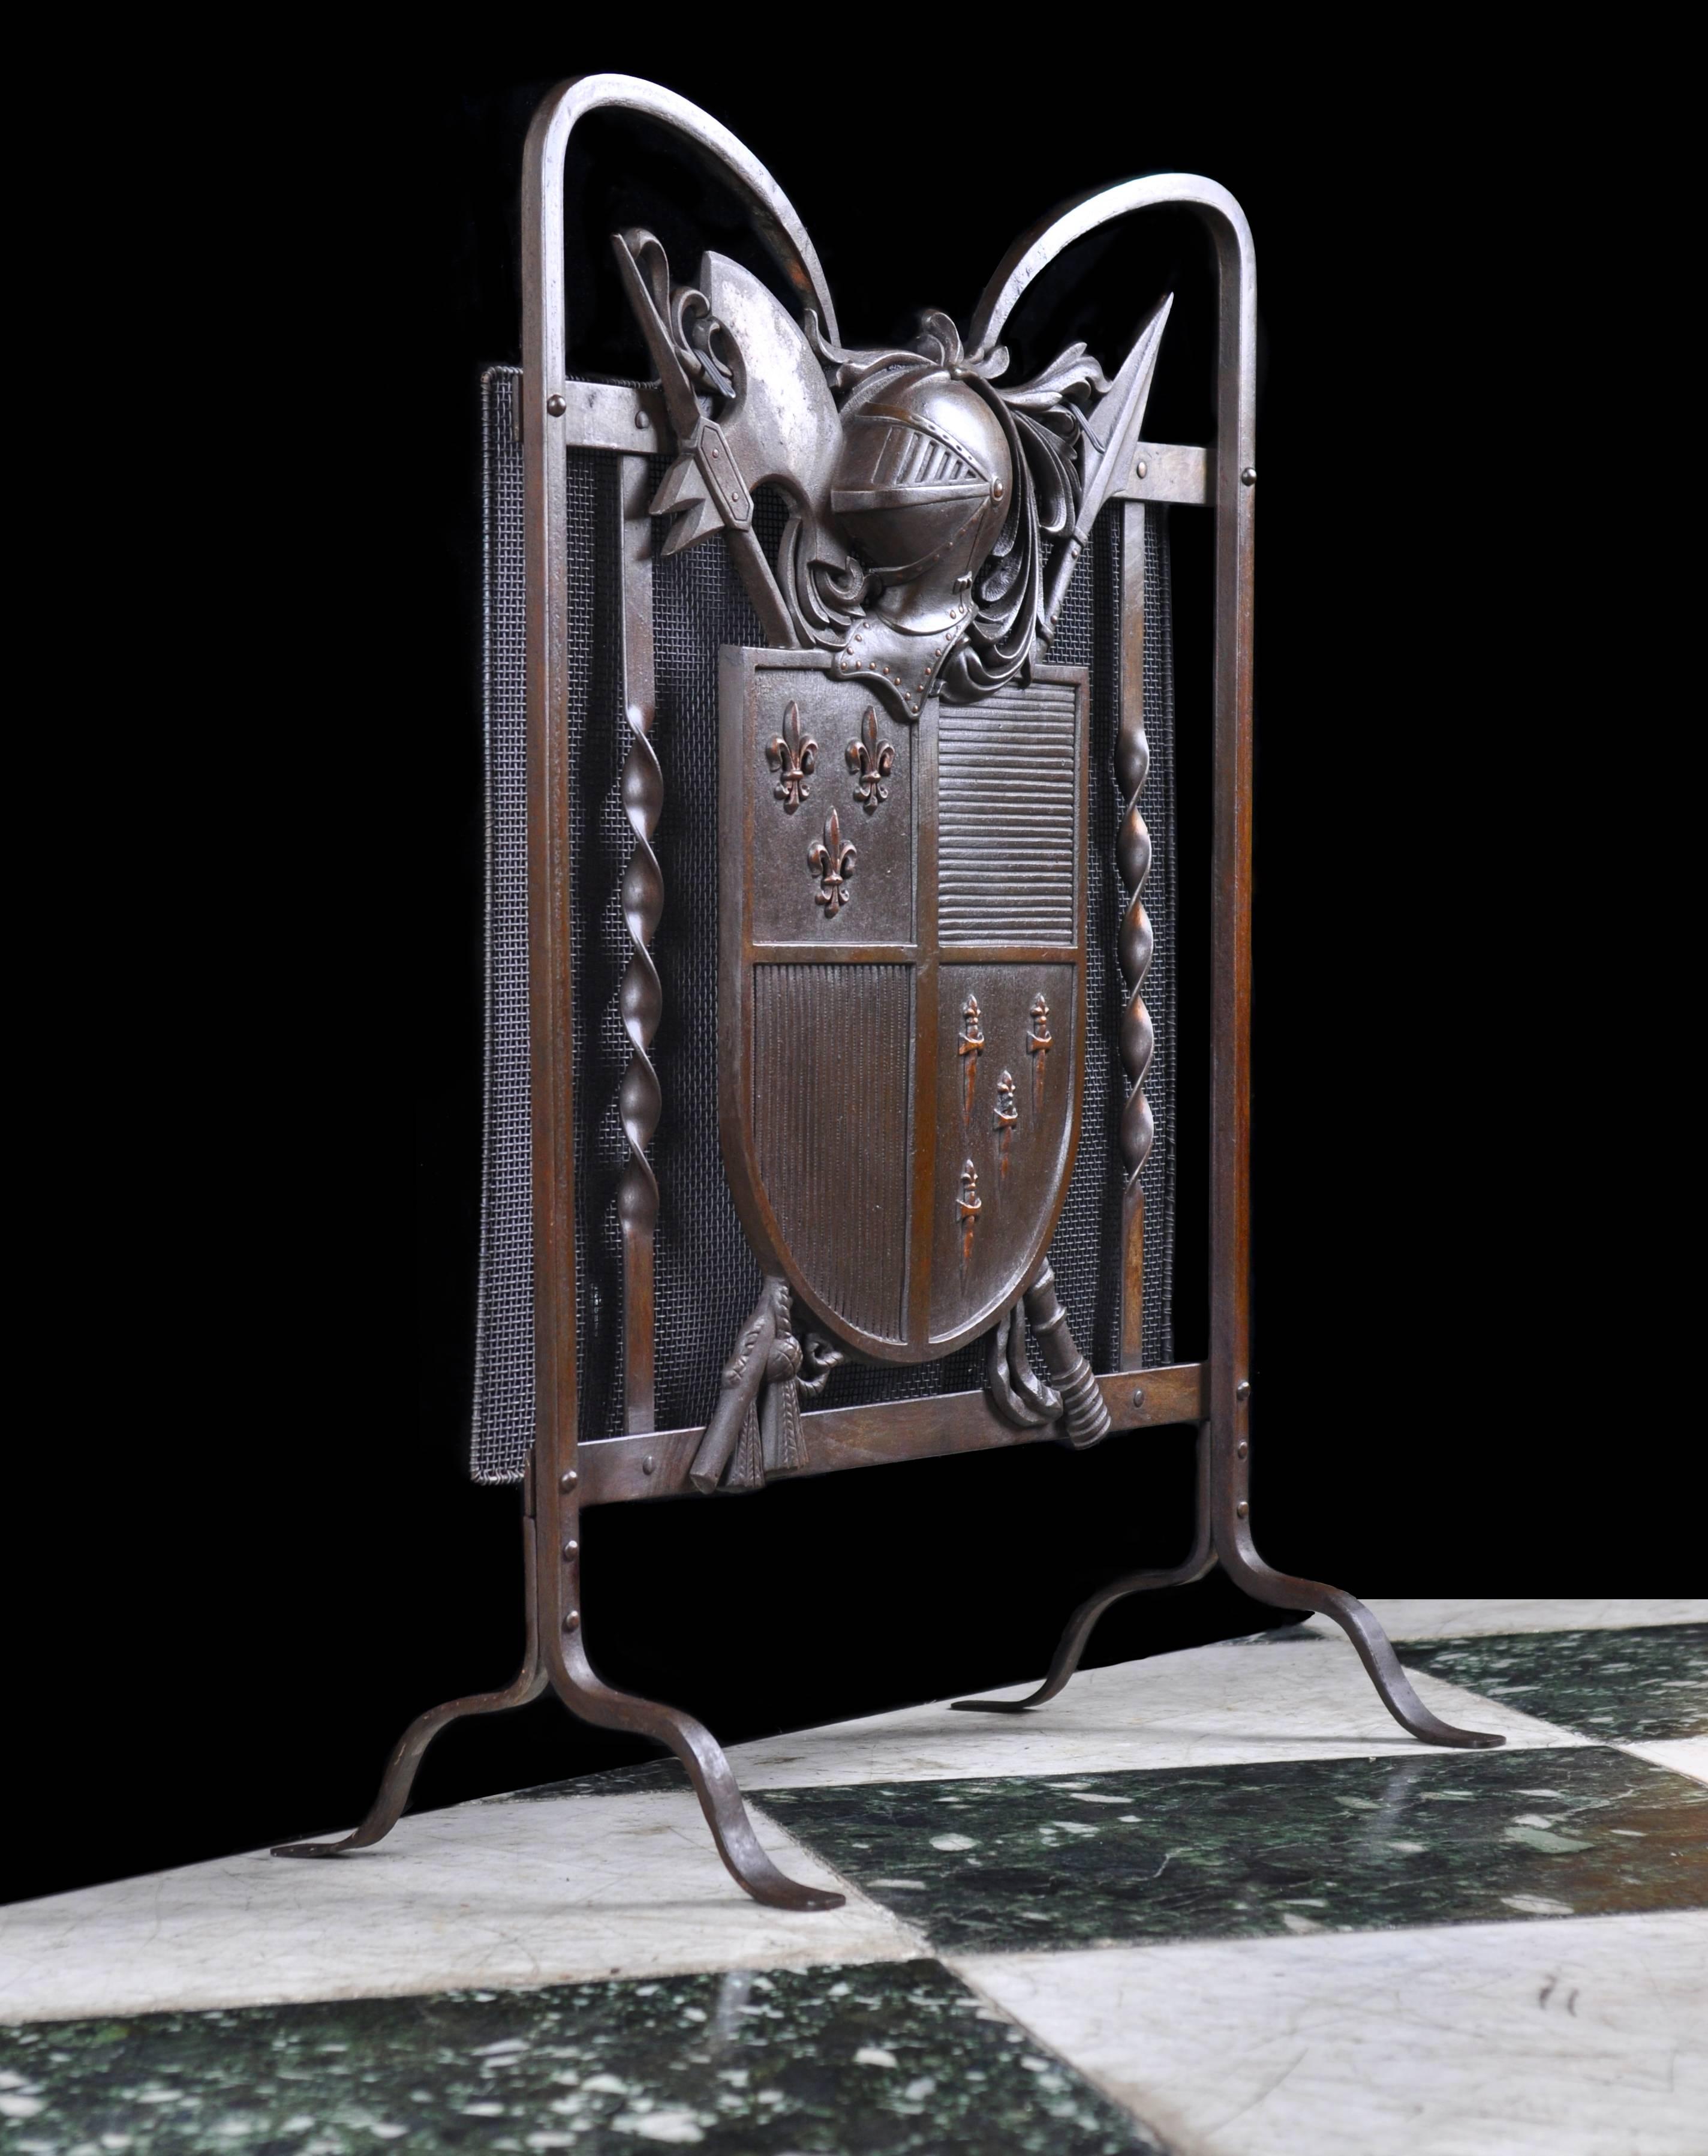 An armorial fireguard of bronze, wrought and cast iron featuring a medieval knight's helmet and a crossed halberd and spear behind a shield with fleur-de-lys and daggers in the quarter panels. Cast in the back are the words - Nestor British Made